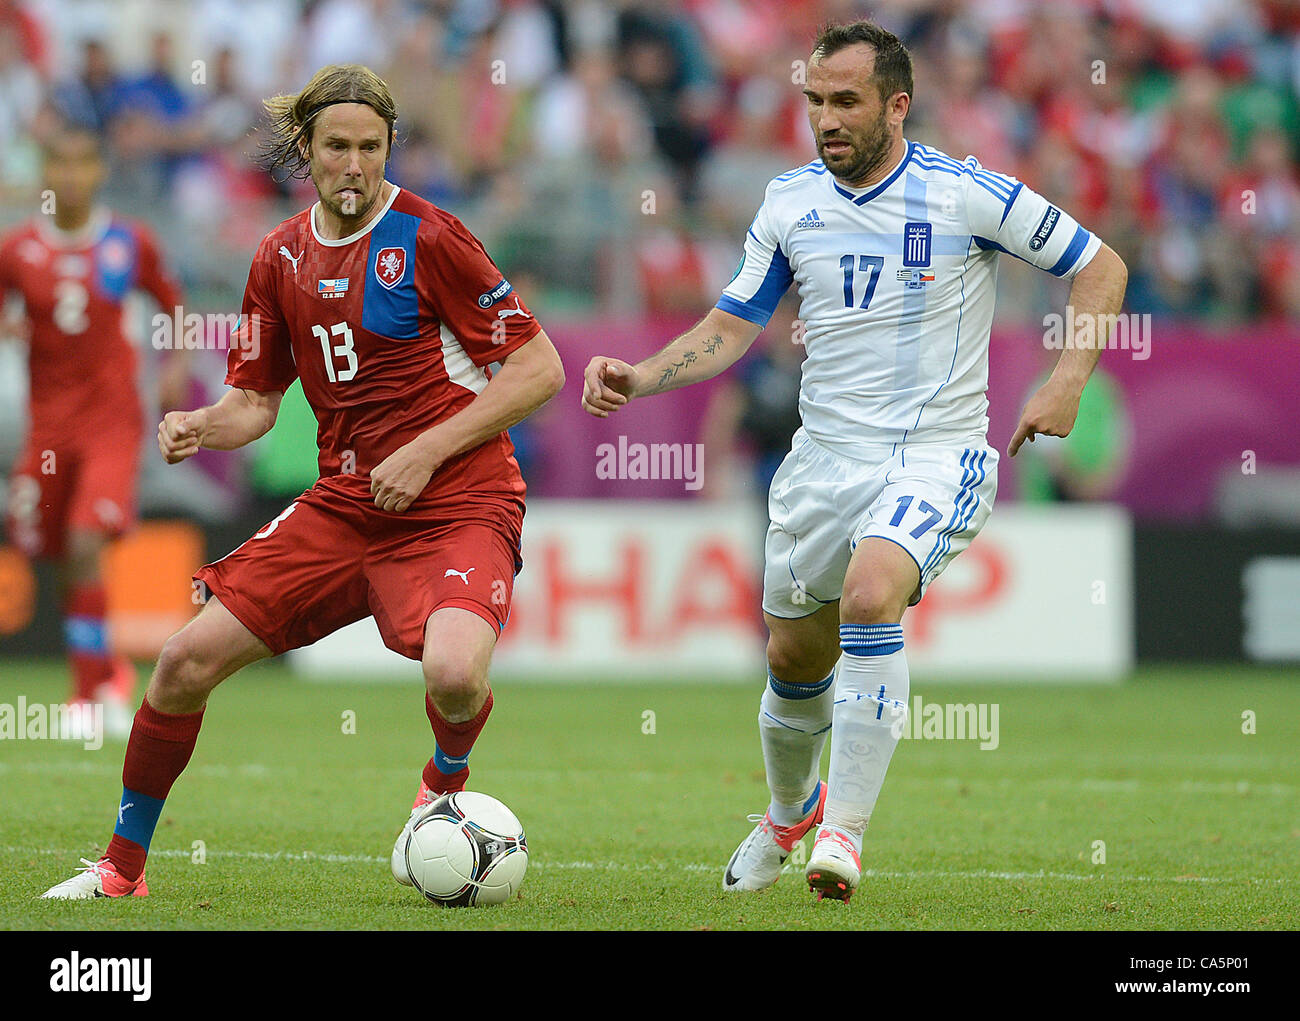 Czech Jaroslav Plasil and Greek Theofanis Gekas during the Euro 2012 soccer championship Group A match between Greece and Czech Republic in Wroclaw, Poland, Tuesday, June 12, 2012. (CTK Photo/Katerina Sulova) Stock Photo